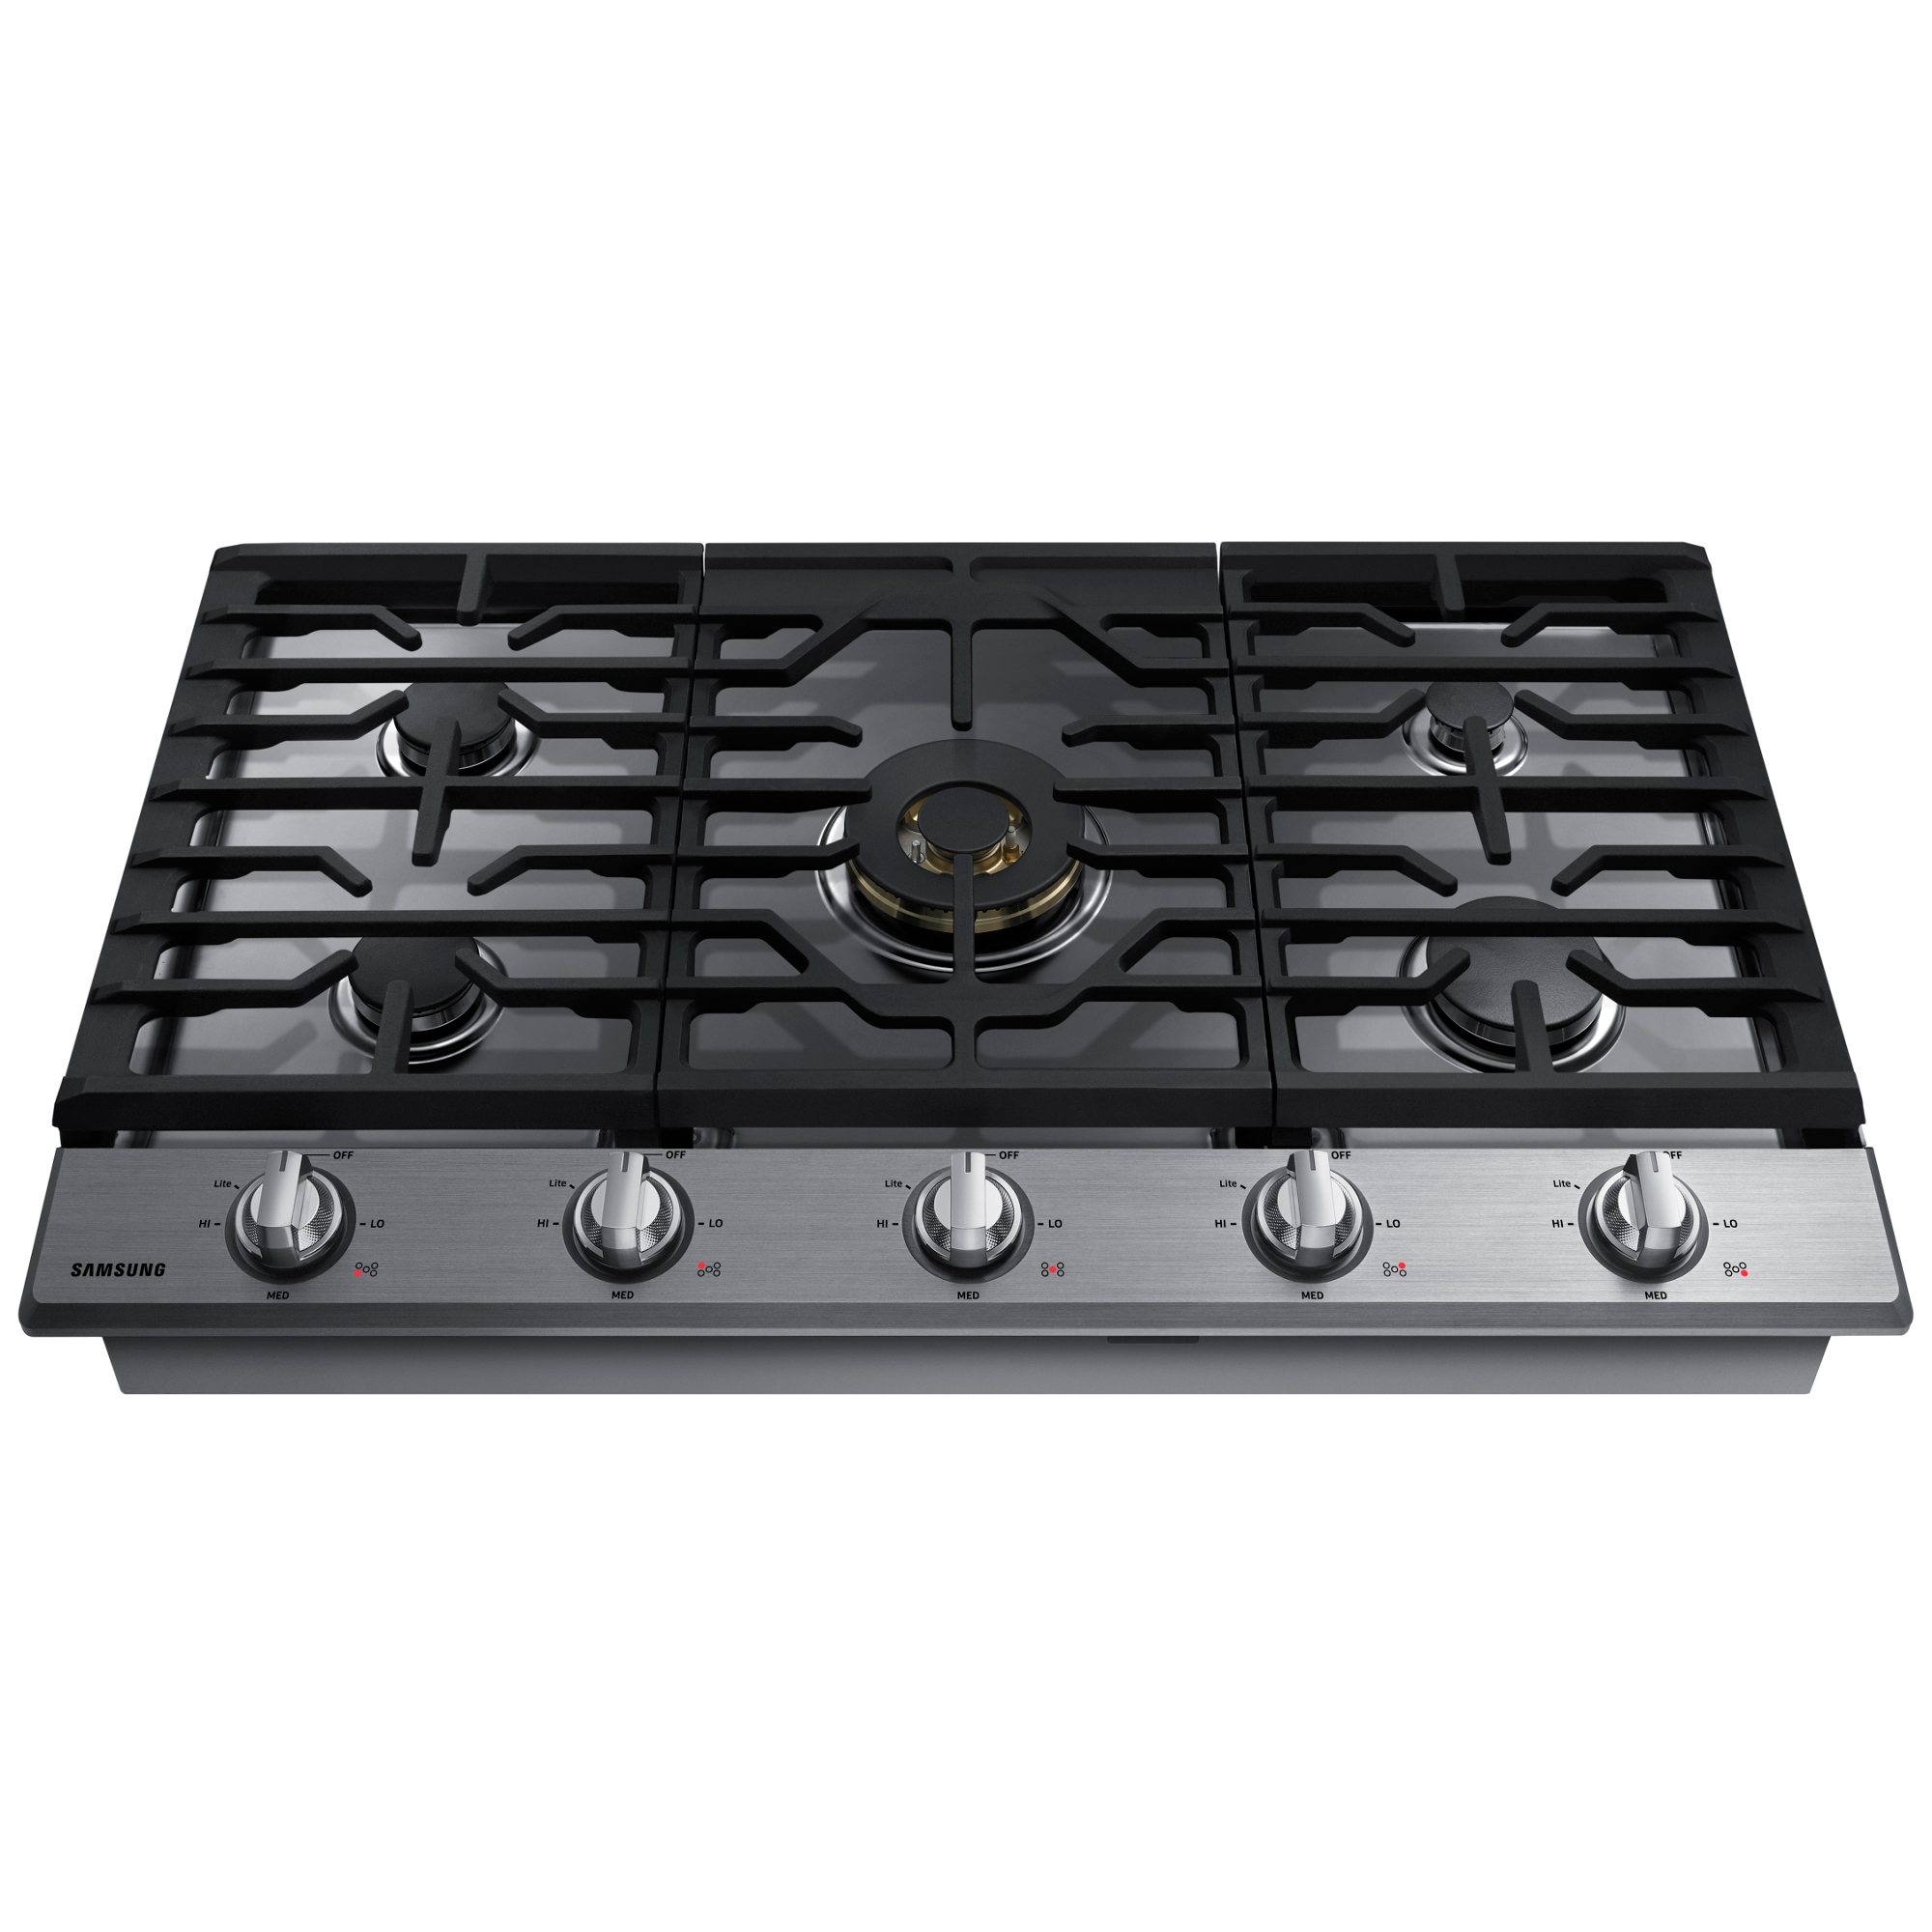 12' Gas Cooktops, 2 Burner Drop-in Propane/Natural Gas Cooker, 12 Inch Stainless